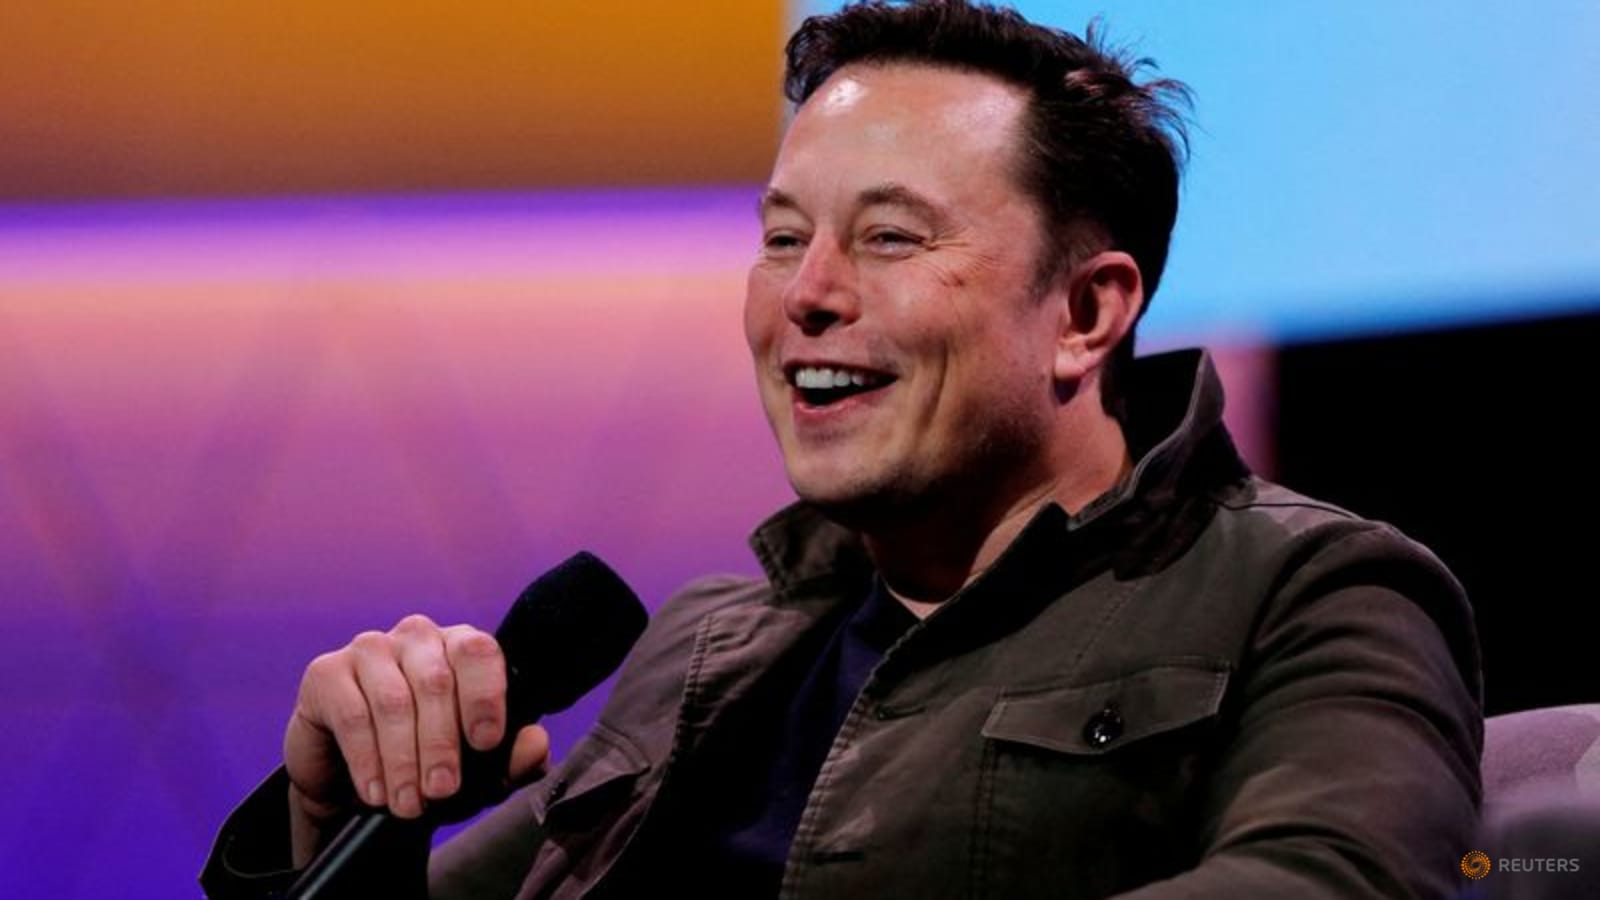 Musk denies report on SpaceX's plans for new funding from Saudi, UAE